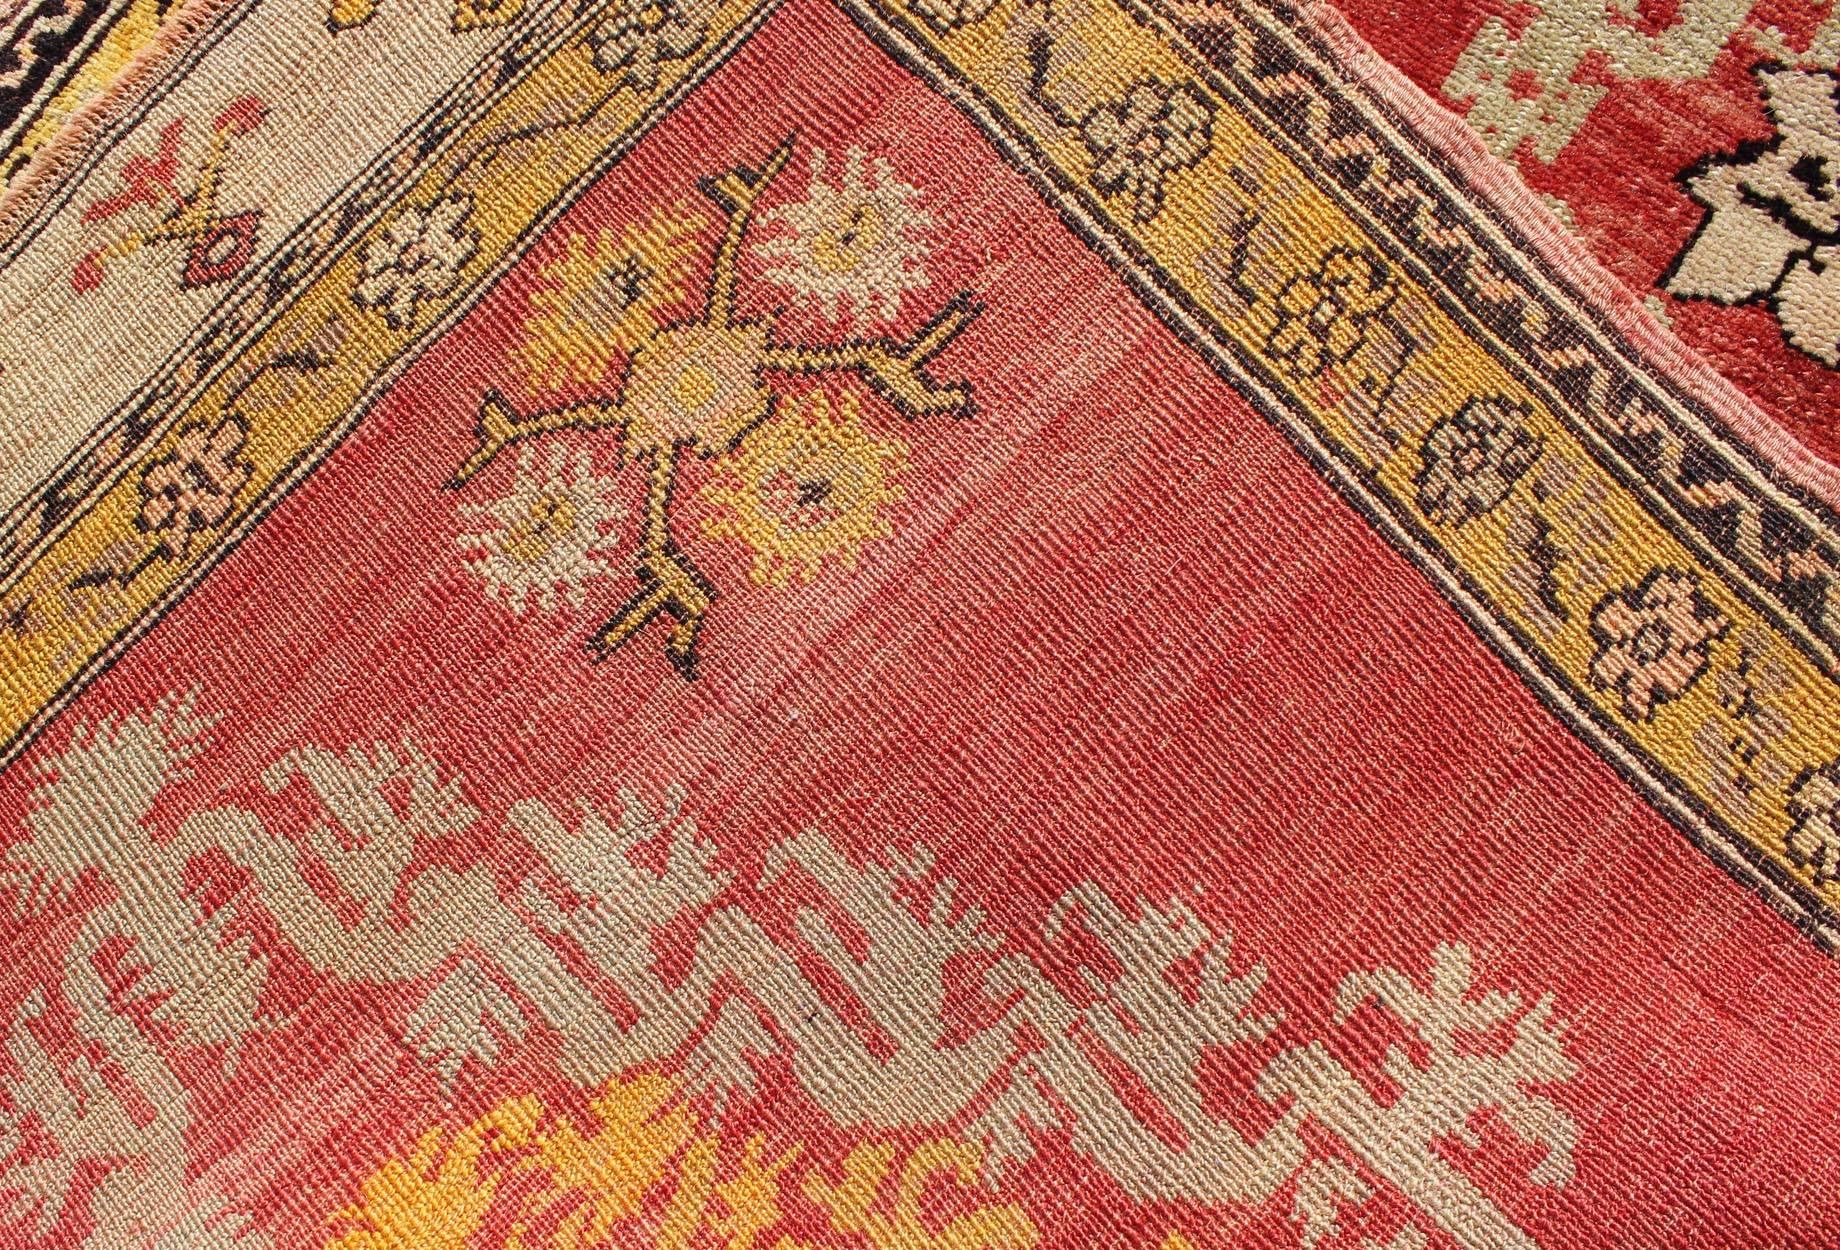 Antique Turkish Oushak Runner with Tribal Medallions in Red, Orange, and Yellow For Sale 3